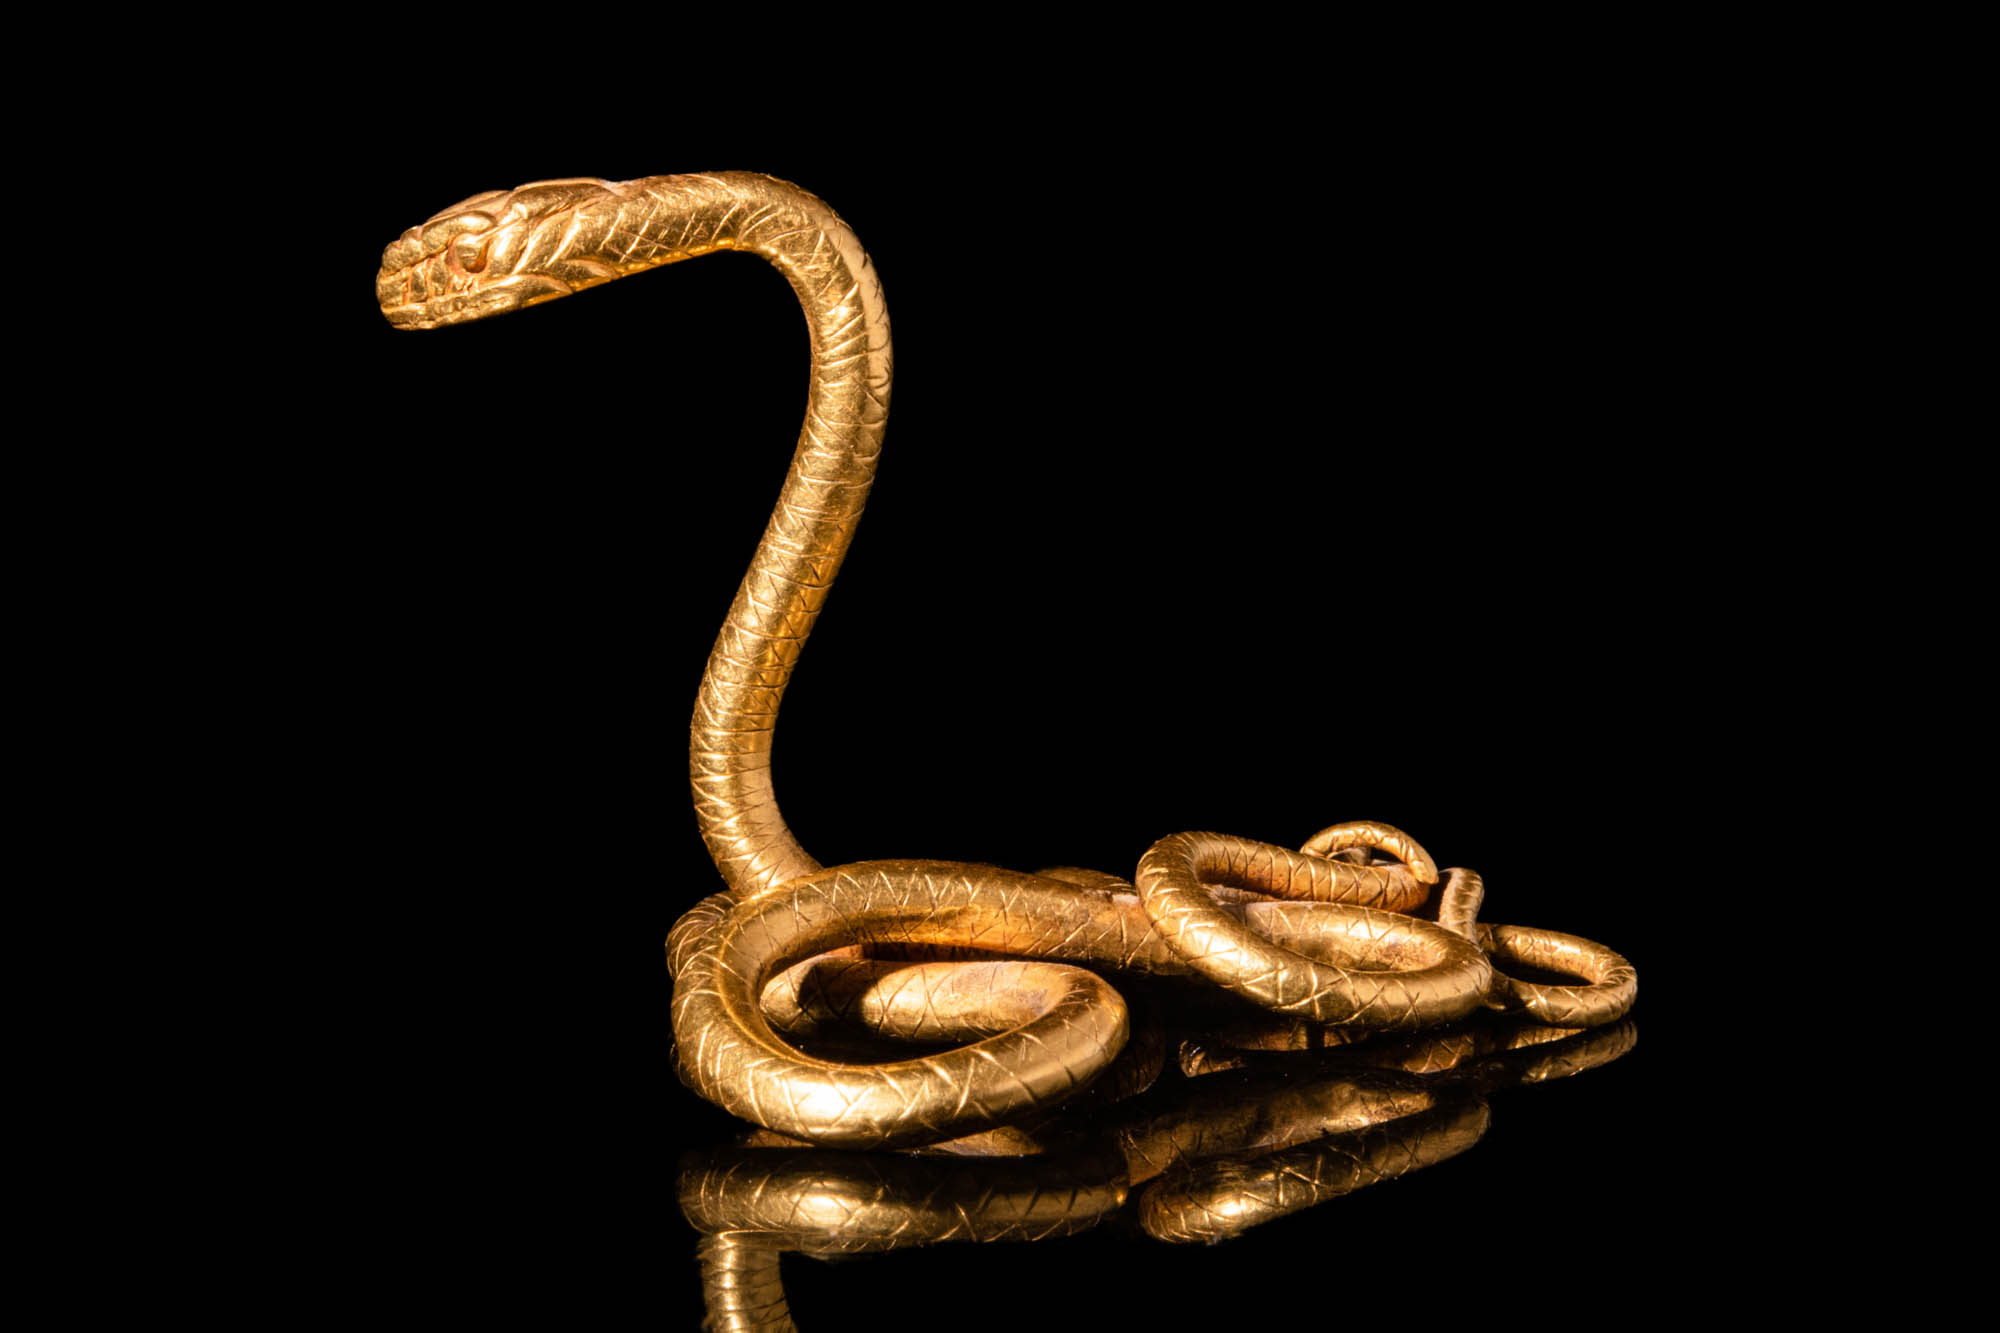 RARE EGYPTIAN GOLD ATTACKING SNAKE FIGURE - Image 2 of 5